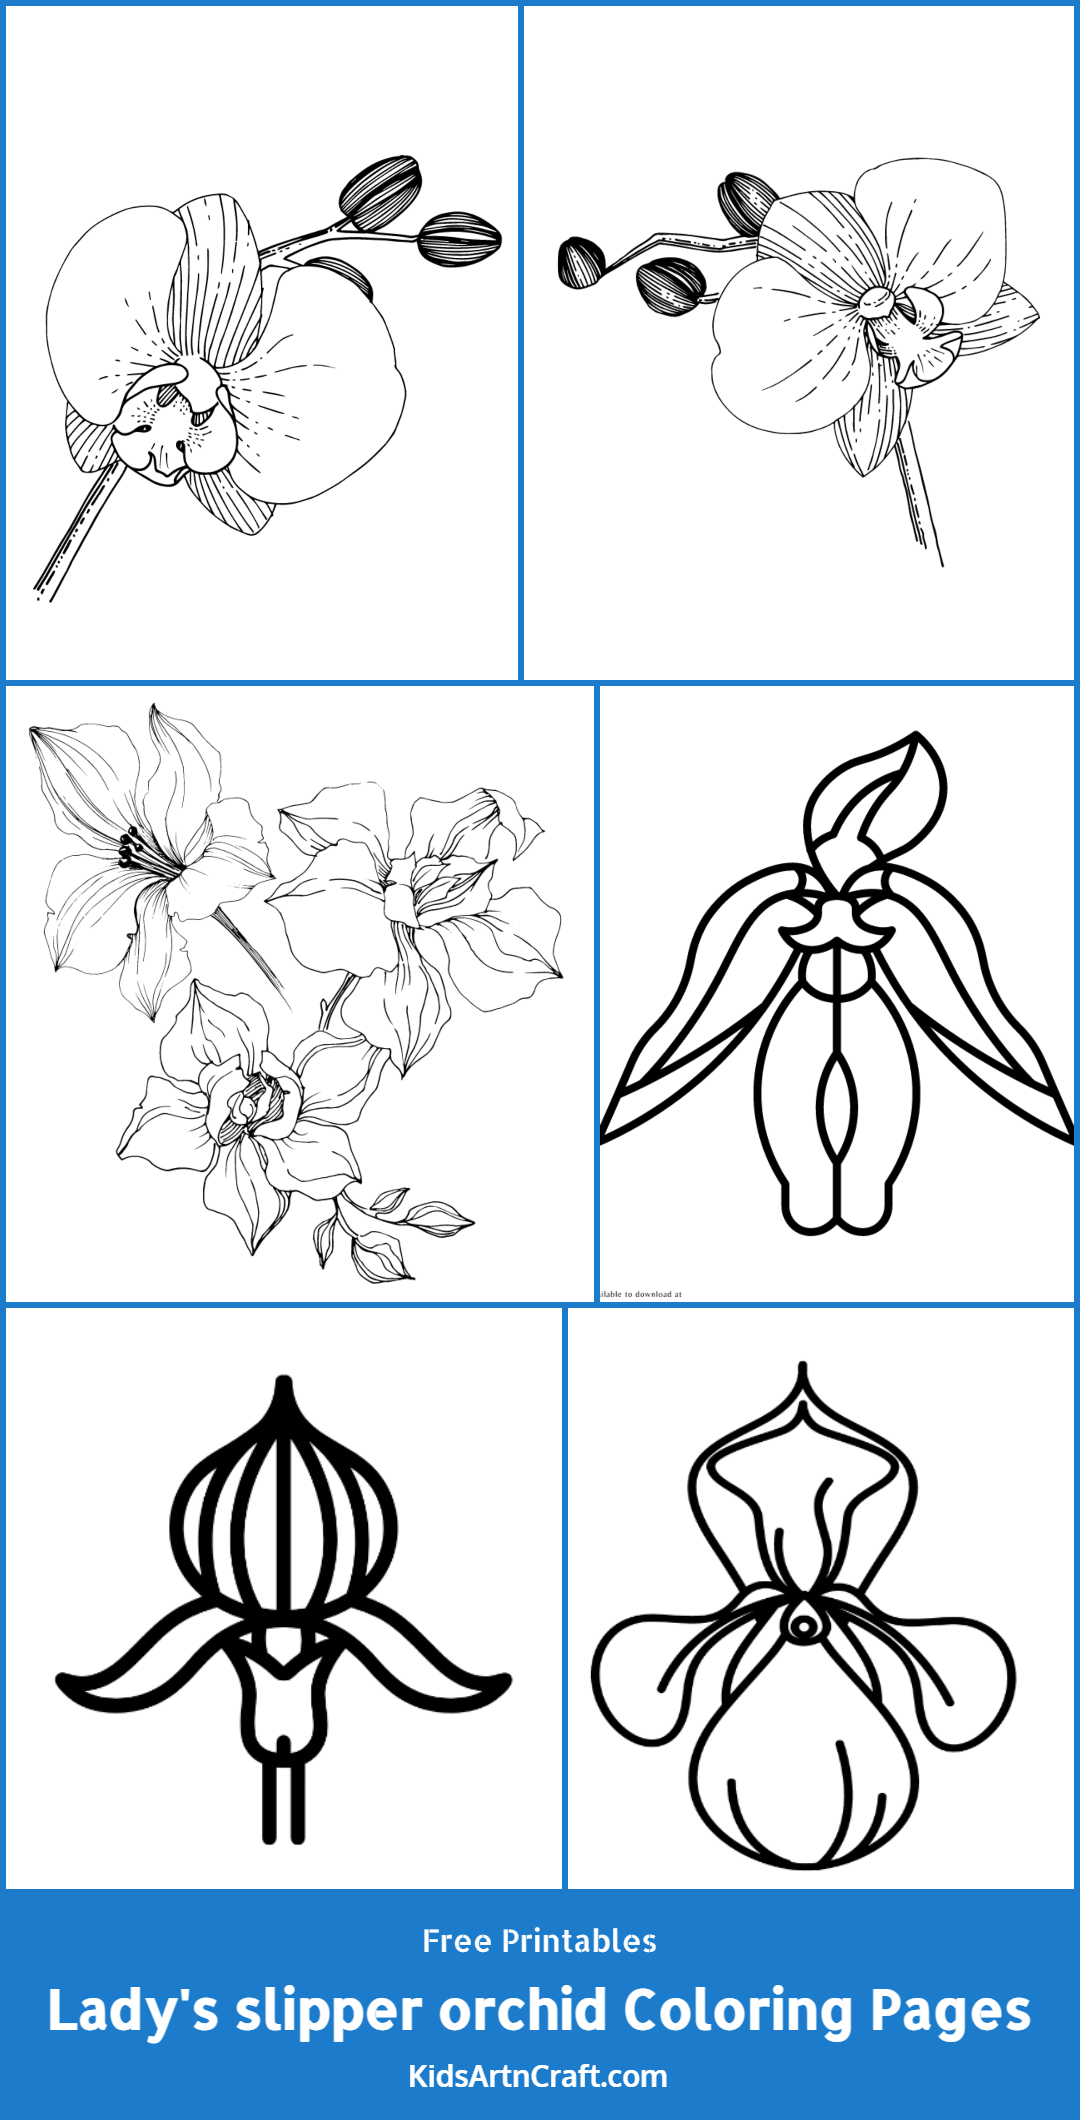 Lady's slipper orchid Coloring Pages For Kids – Free Printables